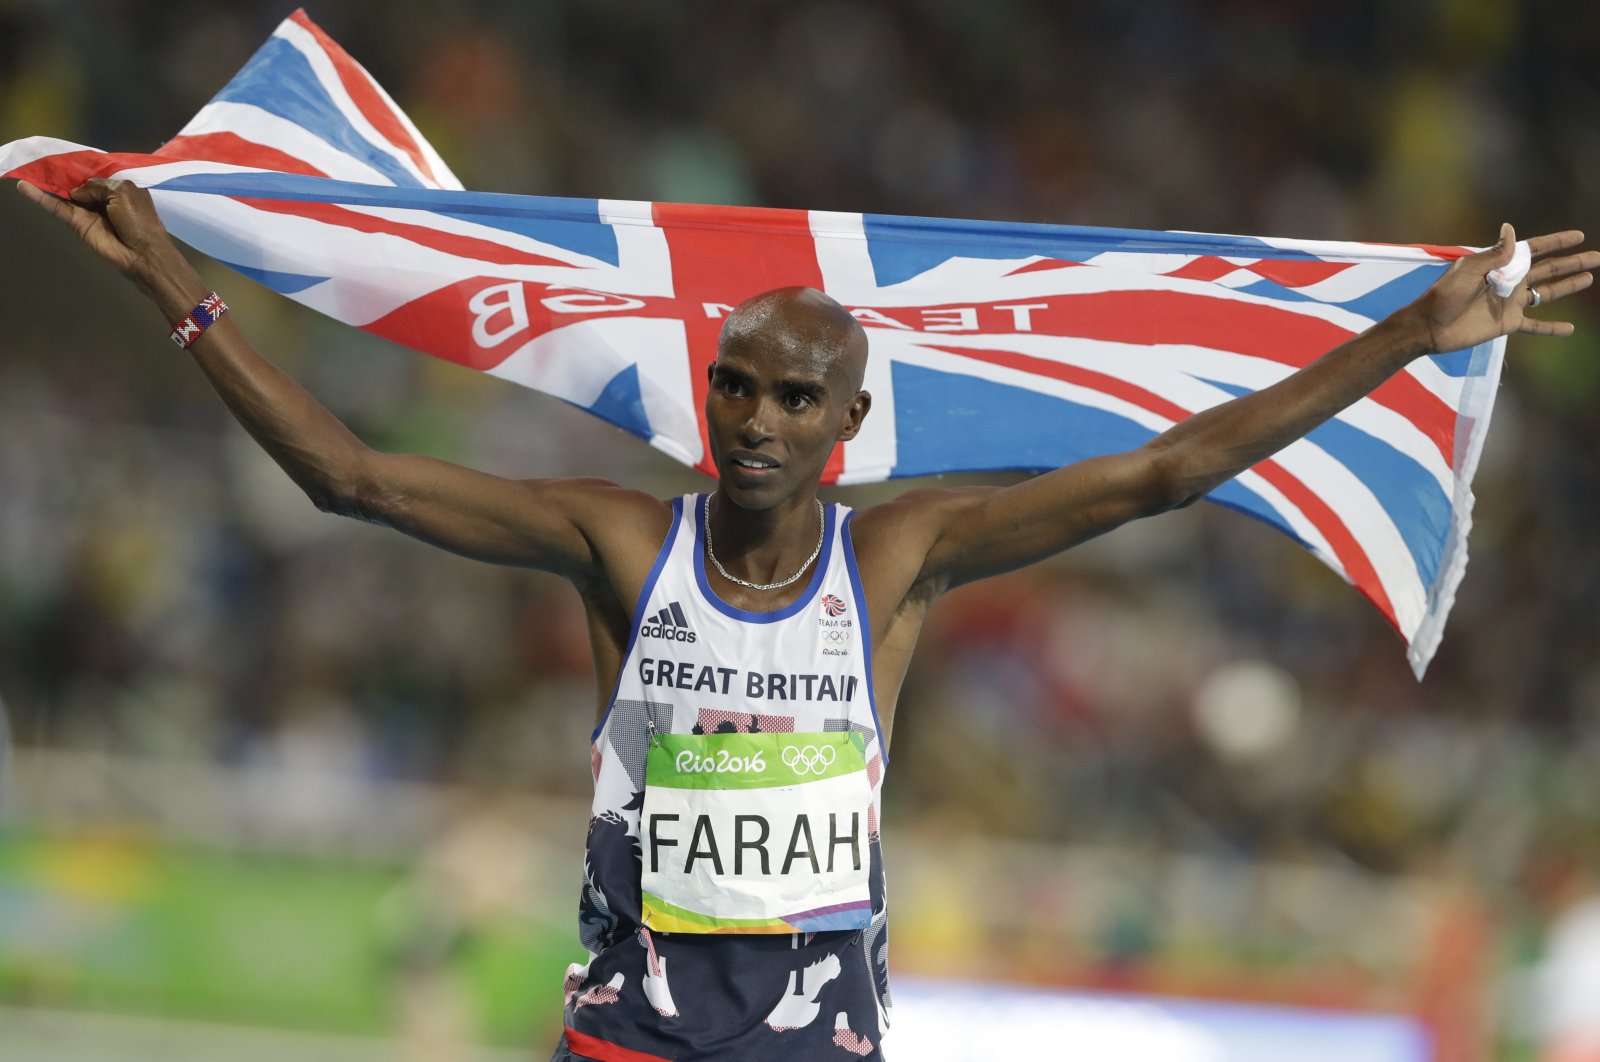 Britain&#039;s Mo Farah celebrates winning the gold medal in the men&#039;s 10,000-meter final during the athletics competitions of the 2016 Summer Olympics at the Olympic stadium in Rio de Janeiro, Brazil, Aug. 13, 2016. Four-time Olympic champion Mo Farah has disclosed he was brought into Britain illegally from Djibouti under the name of another child. The British athlete made the revelation in a BBC documentary. (AP File Photo)